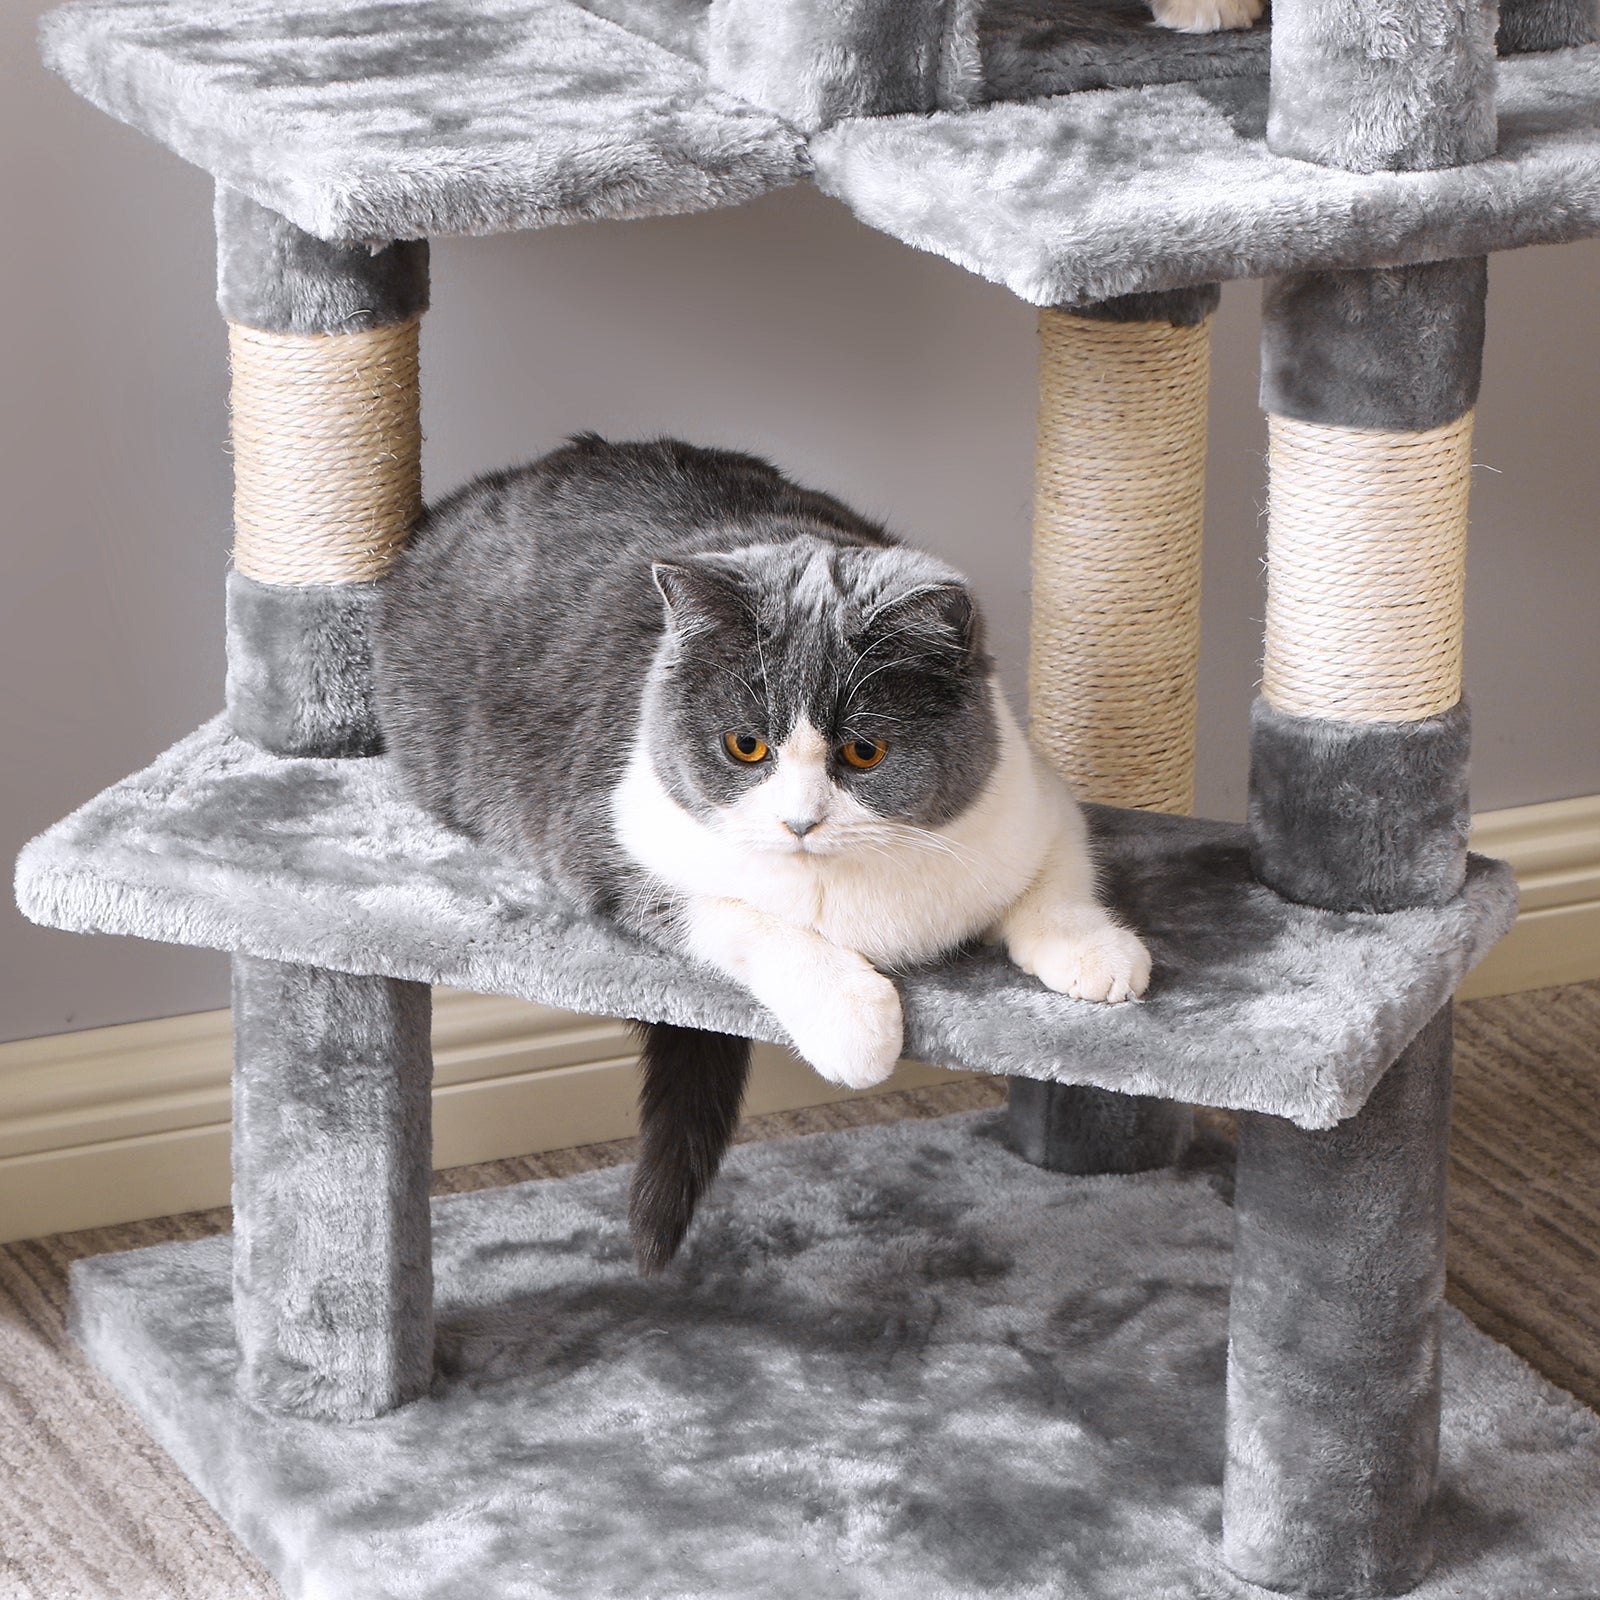 BEWISHOME Cat Tree Tower with Top Plush Perch Multi-Level Cat Condo Sisal Scratching Posts, Cat Play House Activity Center Cat Furniture MMJ12L